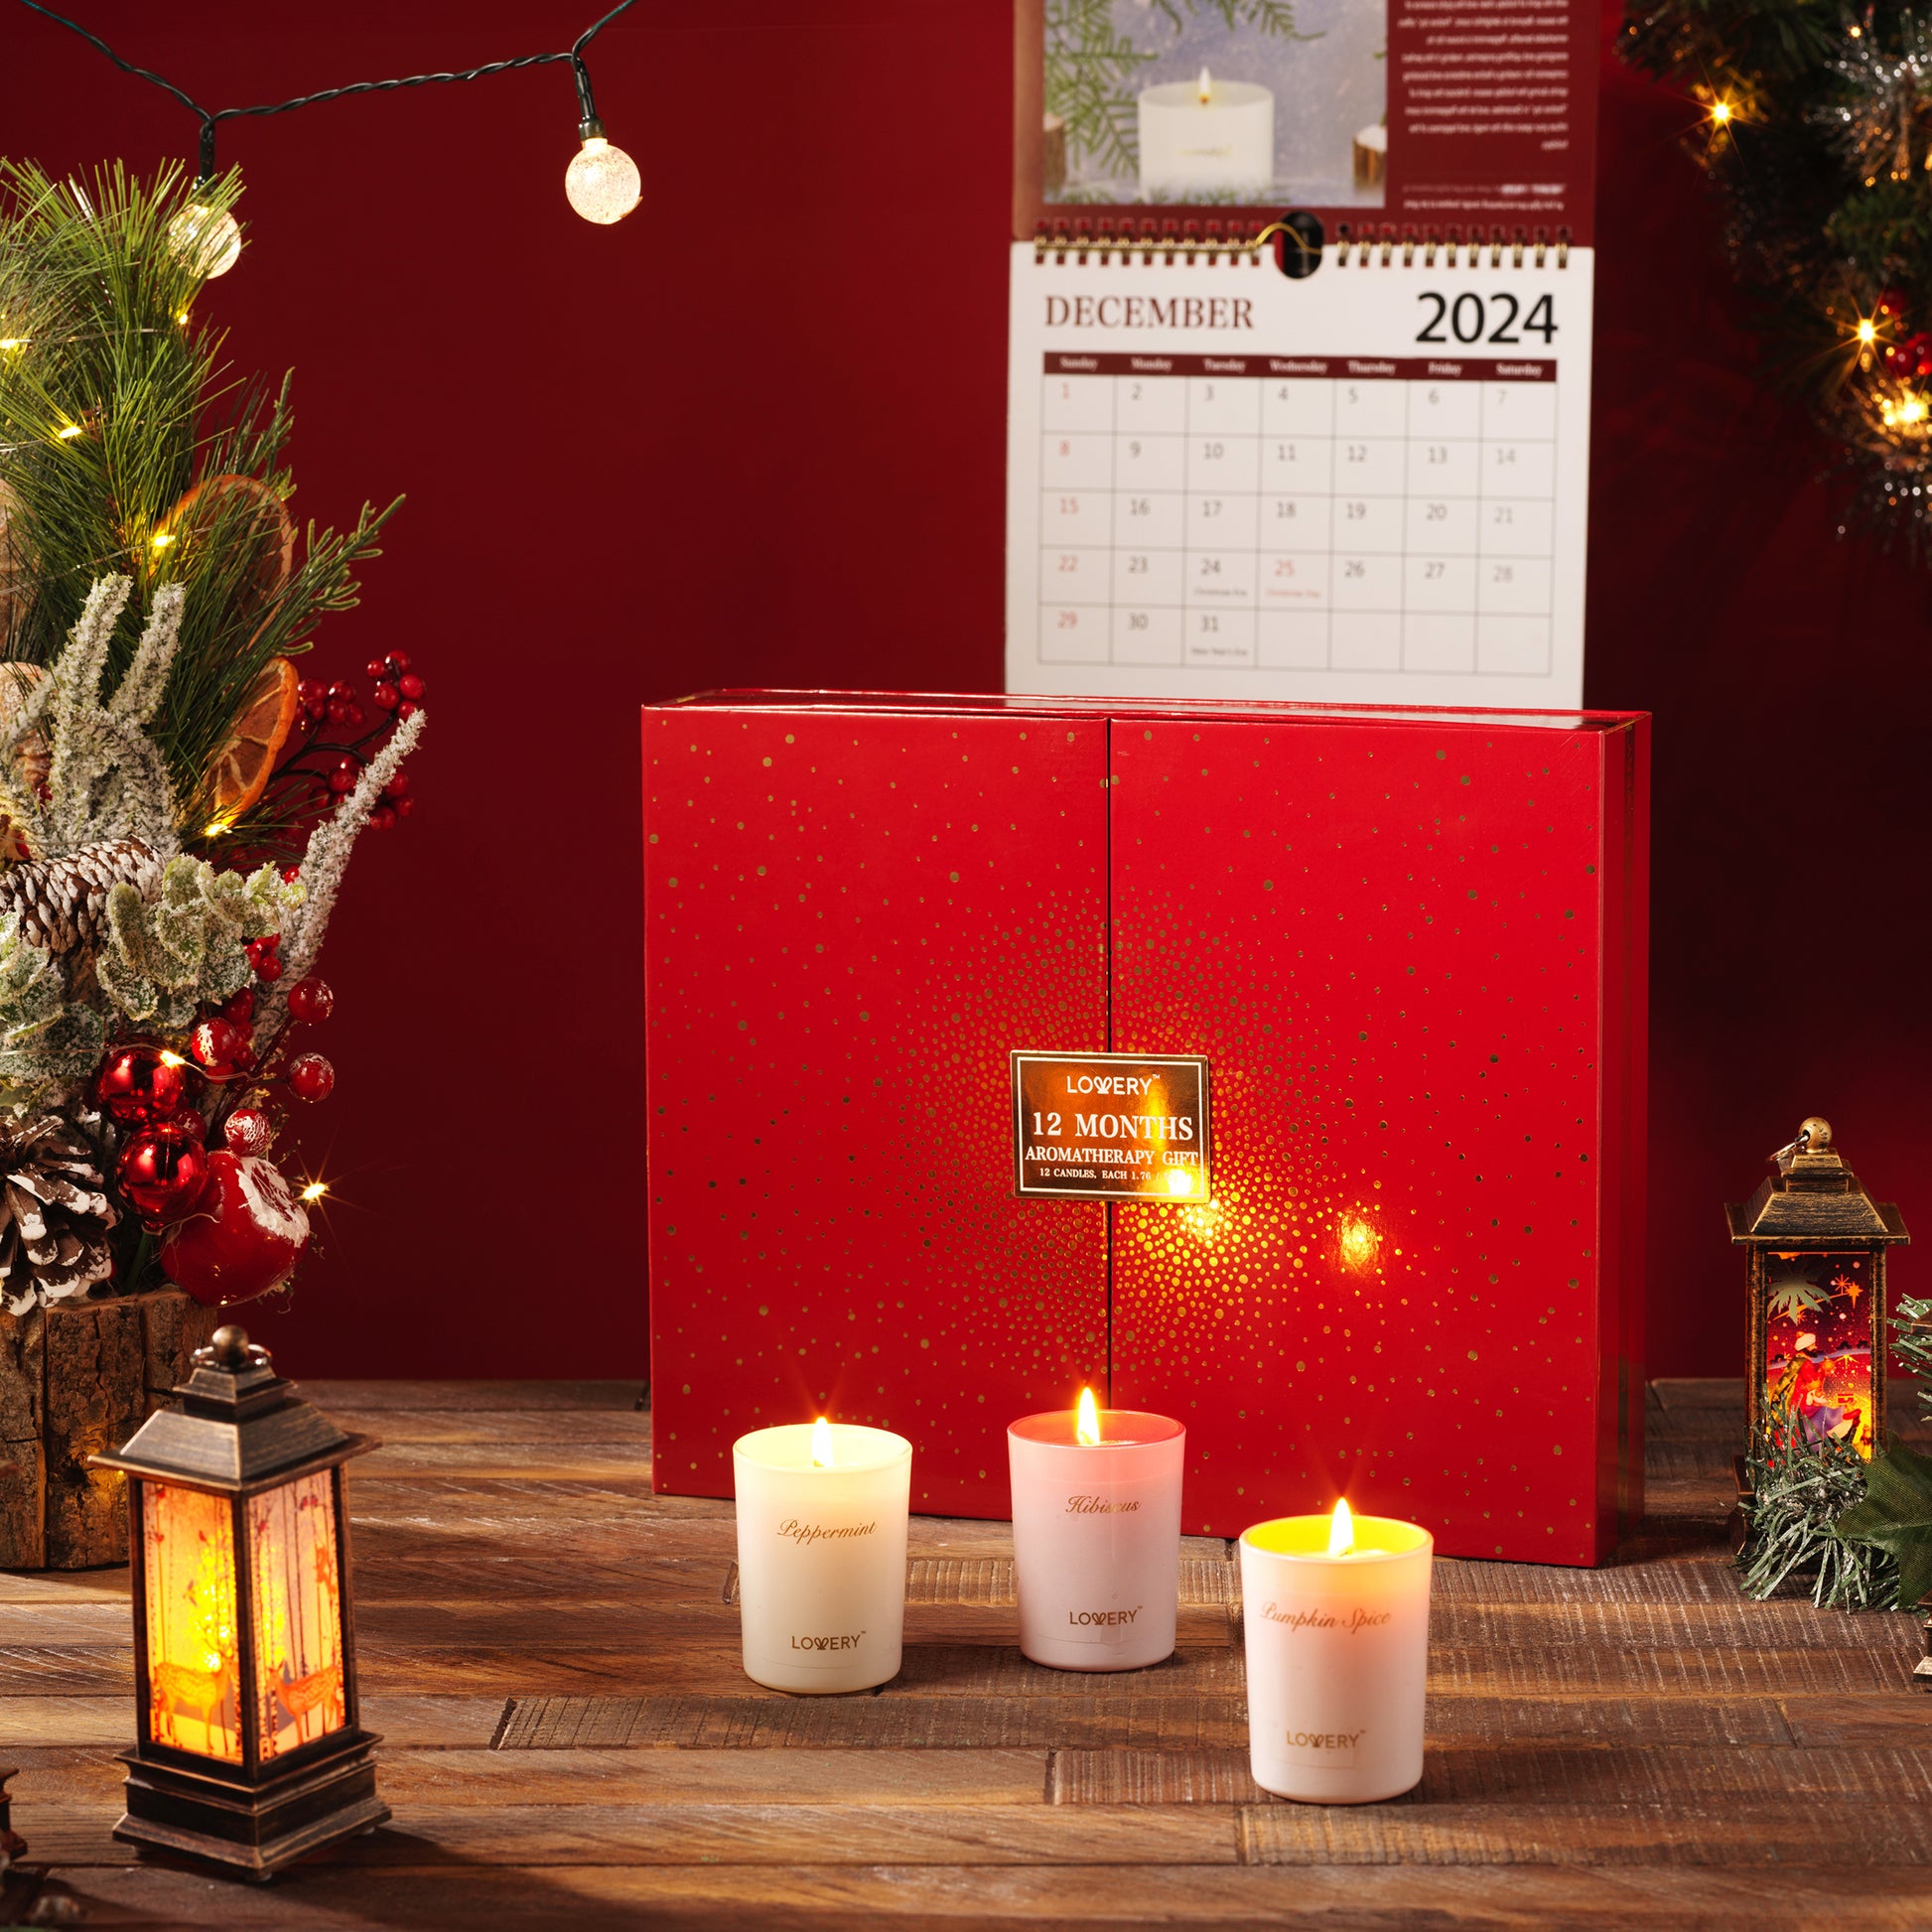 Yankee Candle launches its new Countdown to Christmas Collection